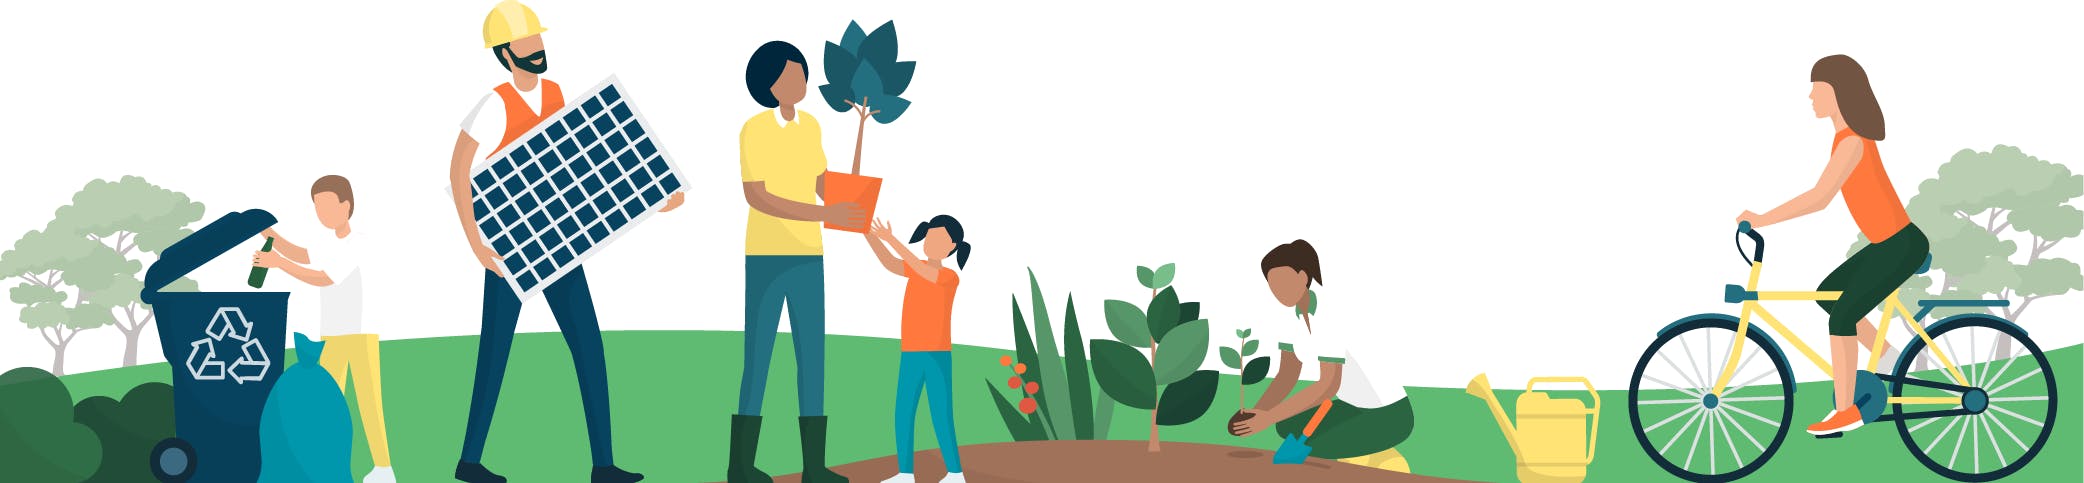 Illustration of people doing various activities outdoors - man recycling, family planting, woman cycling & construction worker carrying solar panel